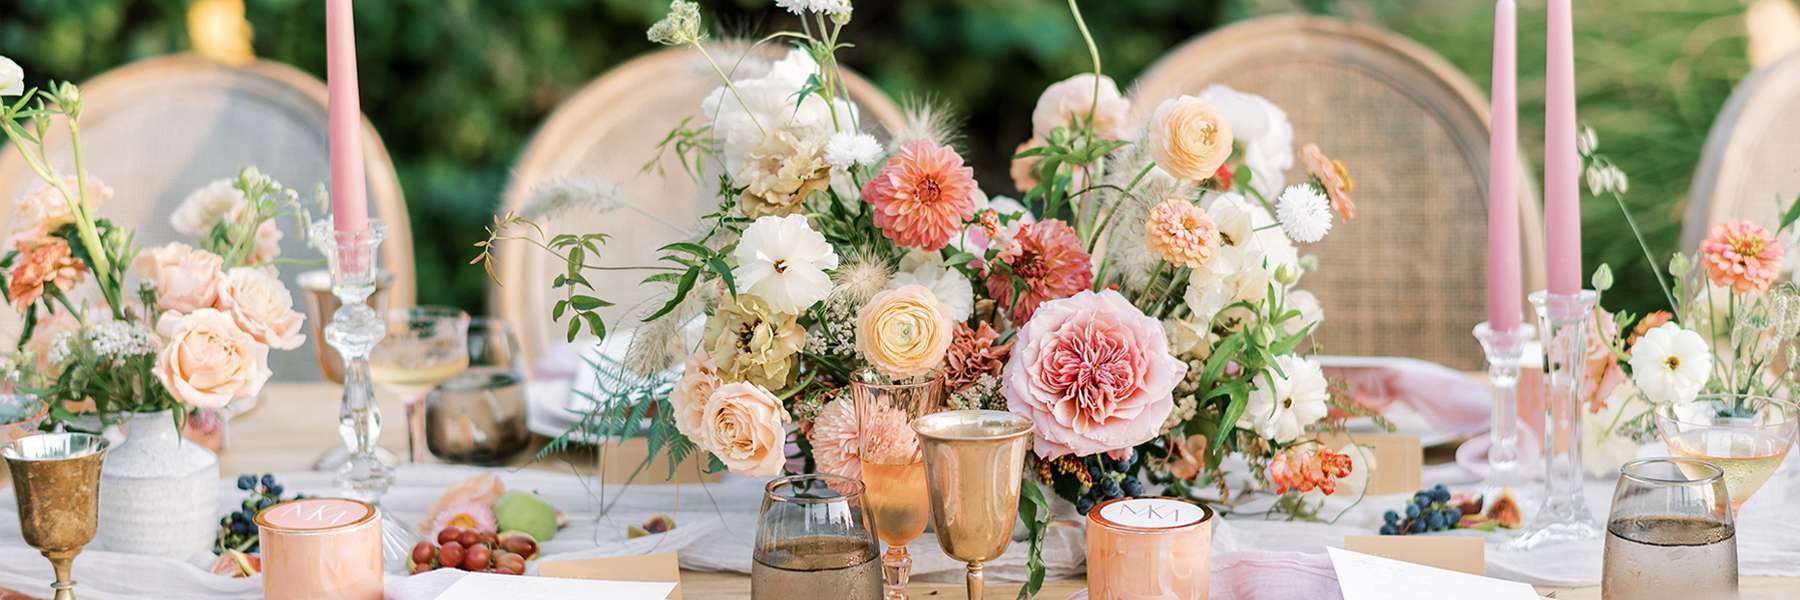 wedding table with floral centerpiece